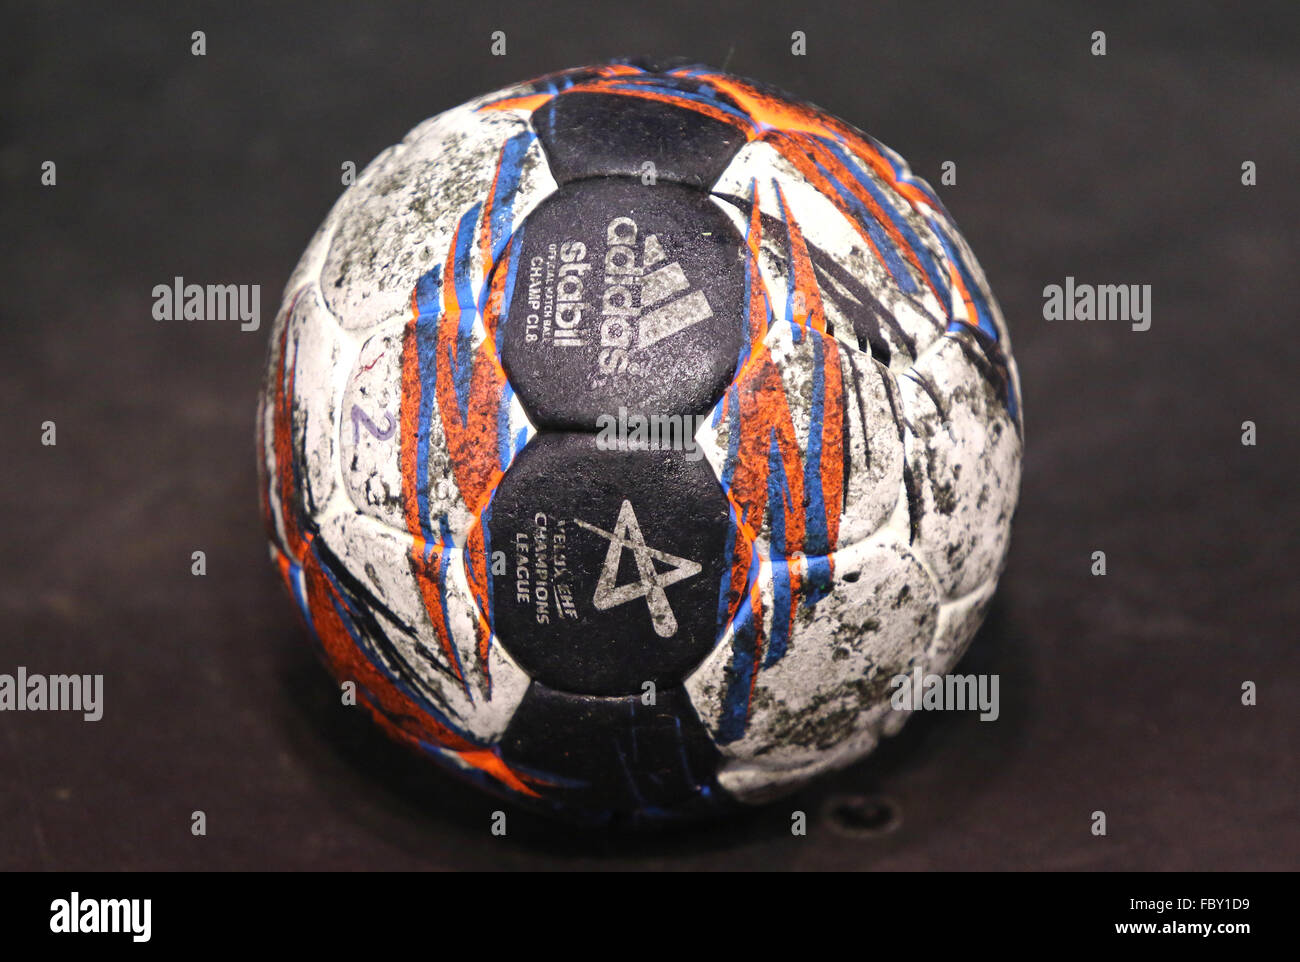 Official VELUX EHF Champions League 2015/16 Handball ball on the floor  during the game of HC Motor against Kadetten Schaffhausen Stock Photo -  Alamy